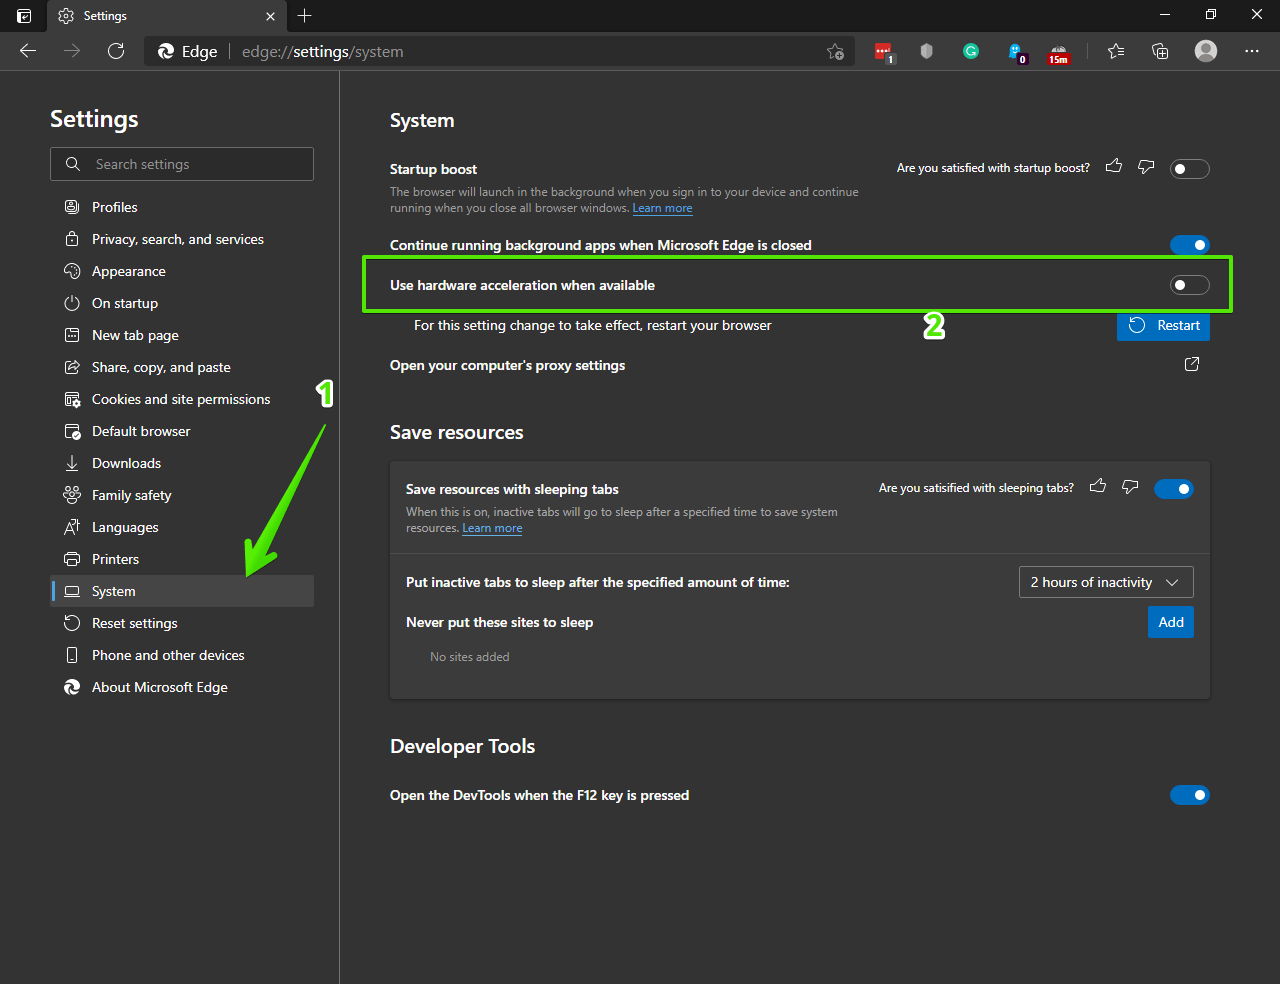 Disable Hardware acceleration in Edge